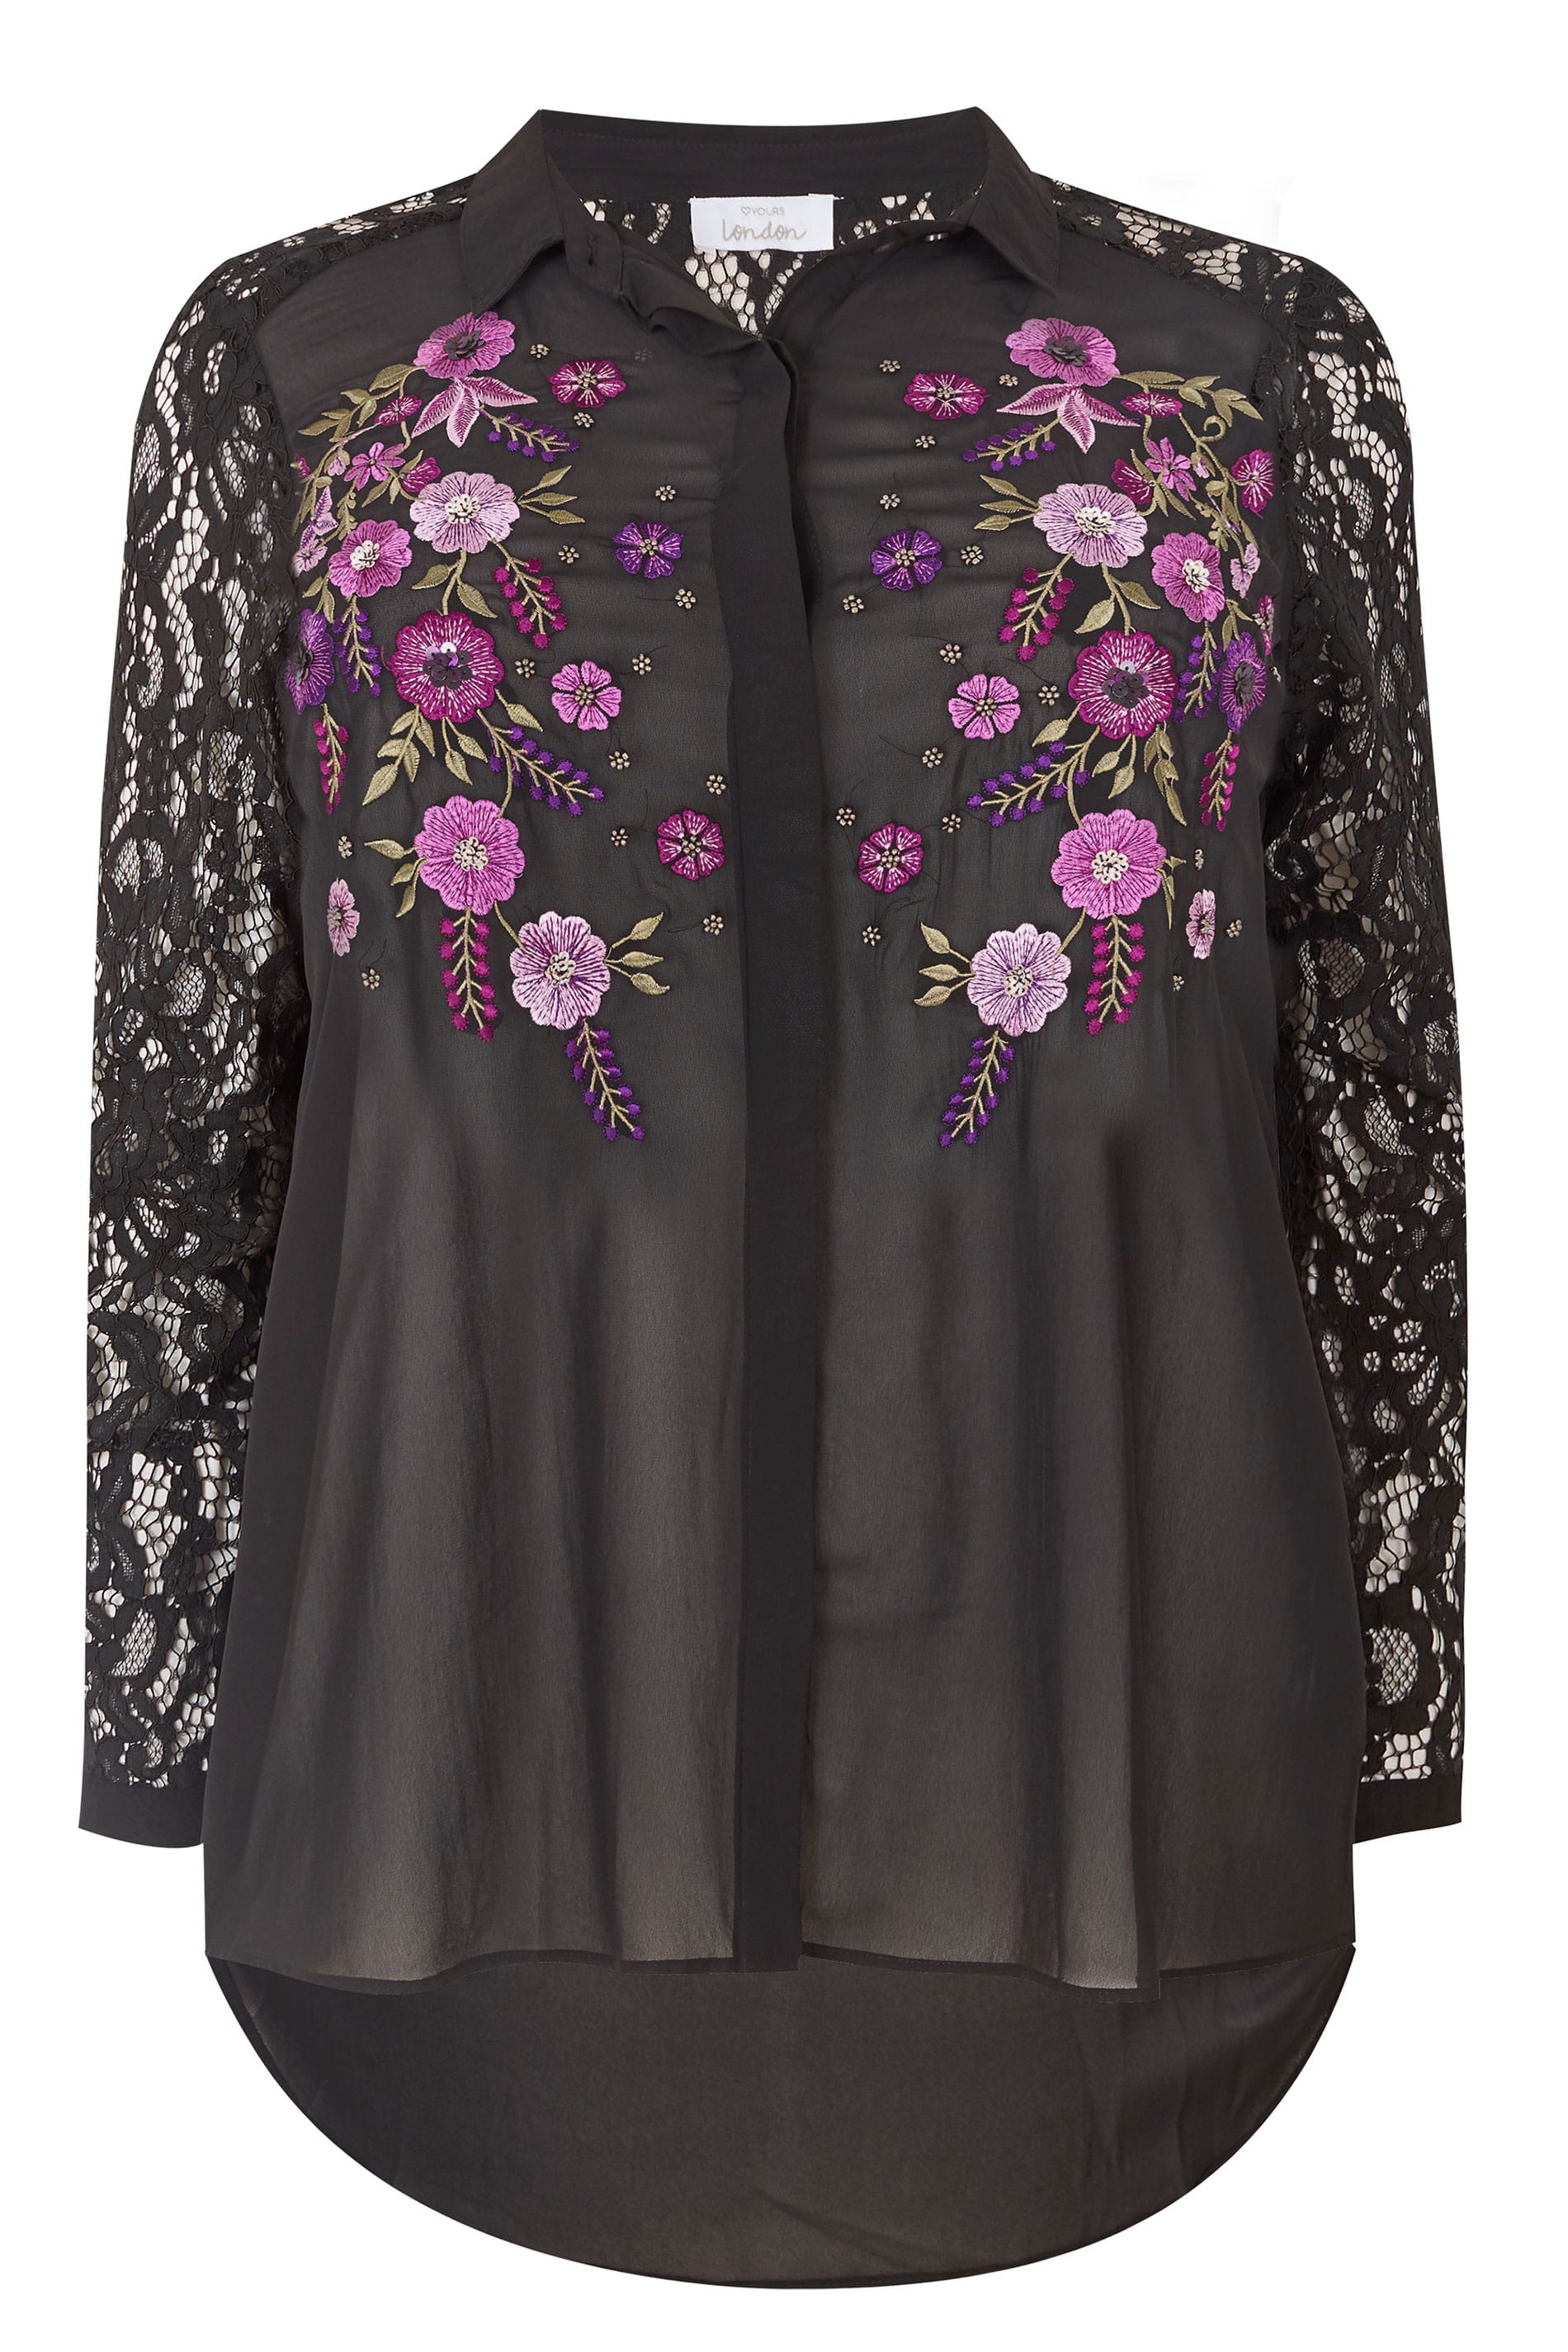 Yours London Black And Purple Floral Sequin Embroidered Shirt With Lace